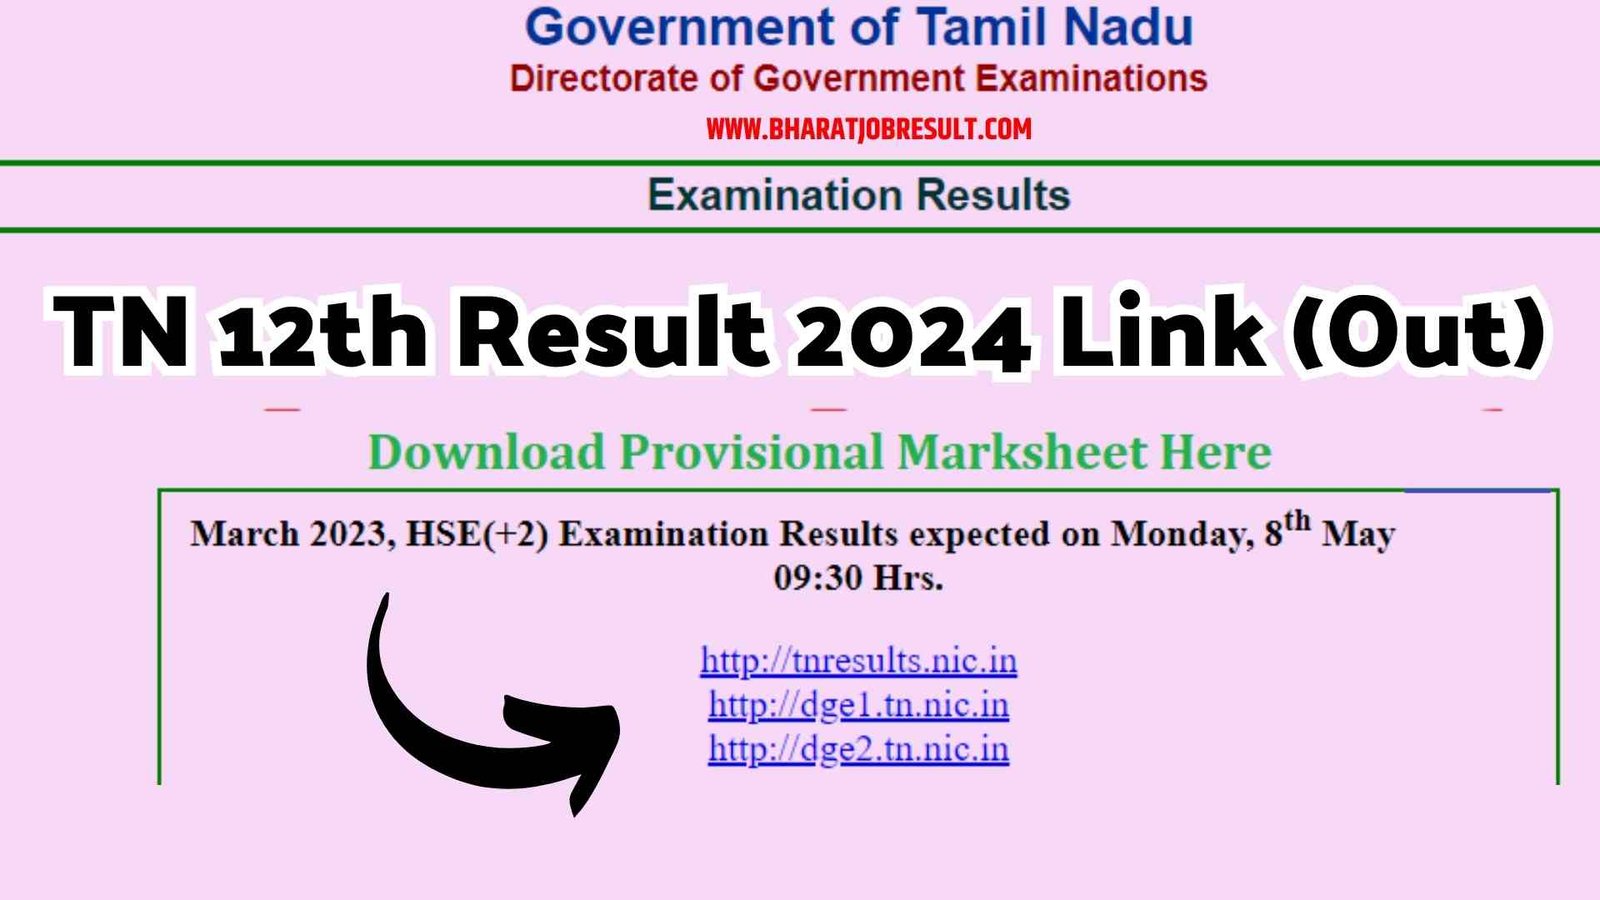 TN 12th Result 2024 Link (Out) tnresults.nic.in 2024 HSC (+2) Result, Marksheet